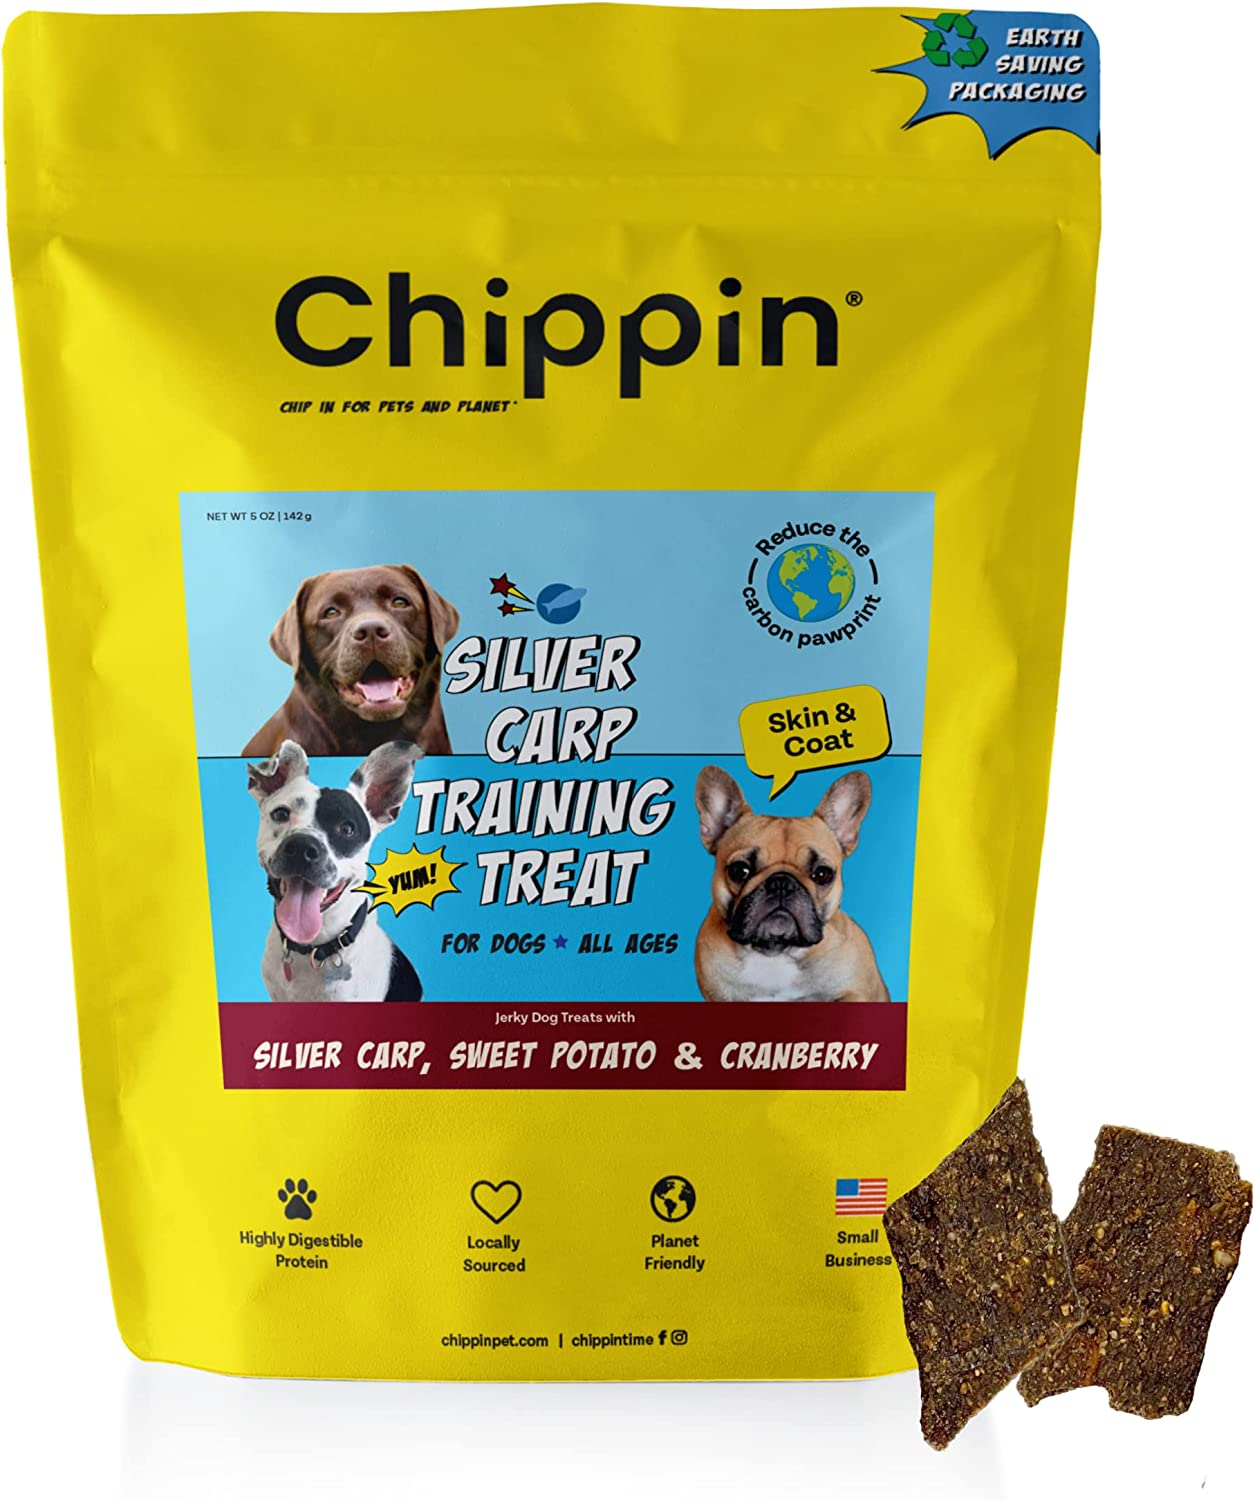 Fish Jerky Healthy Dog Treats, Sustainable, Hypoallergenic & Human-Grade Protein, Soft and Breakable for Puppies & Senior Dogs, Natural Superfood for Sensitive Stomachs, Made in USA (5Oz)